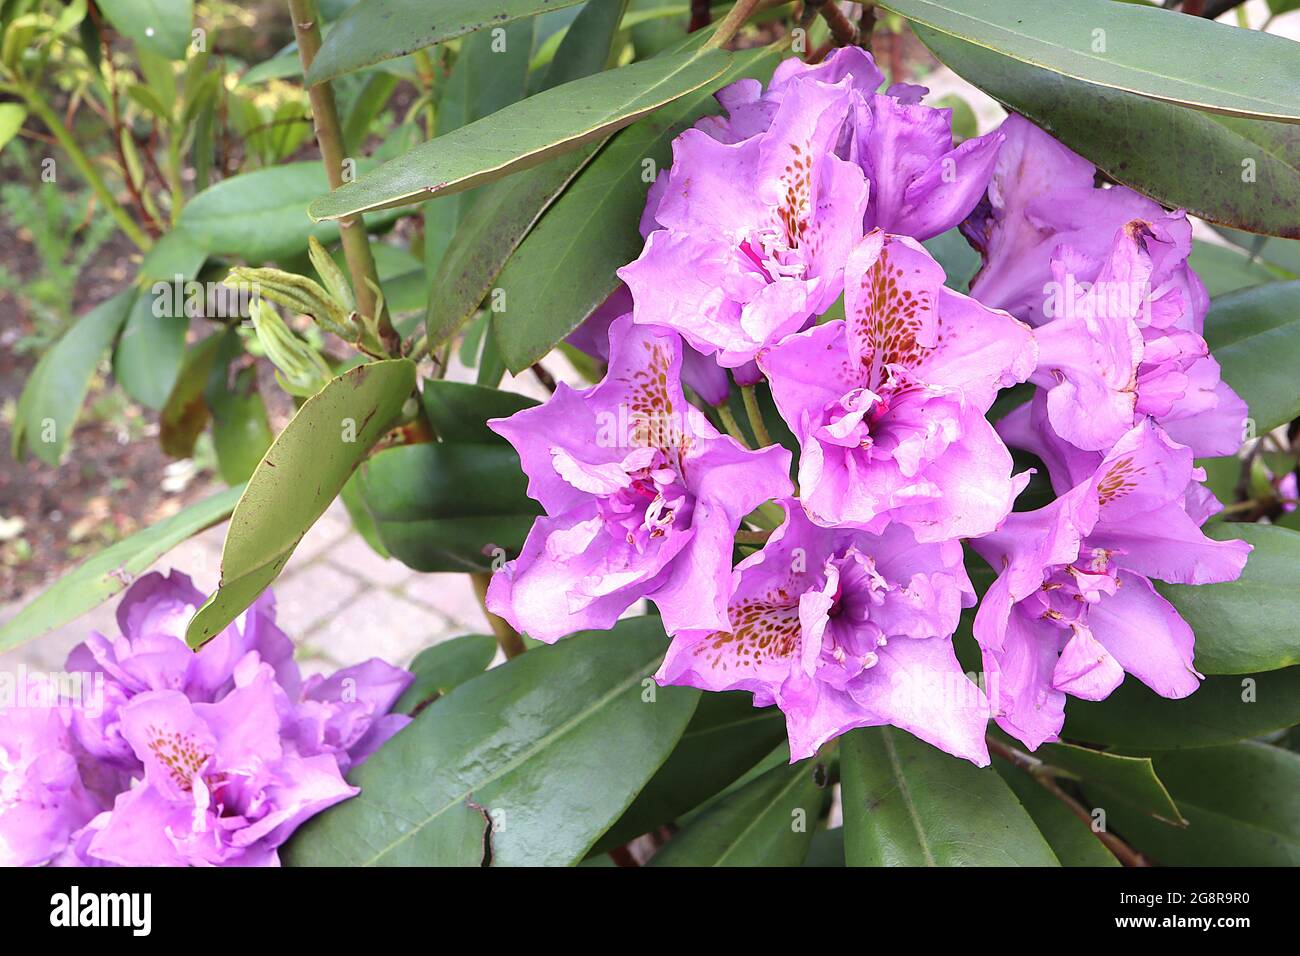 Rhododendron ‘Lavender Queen’ violet lavender funnel-shaped flowers with ruffled petaloid segments and brown blotch, dark green oblong leaves,  May,UK Stock Photo